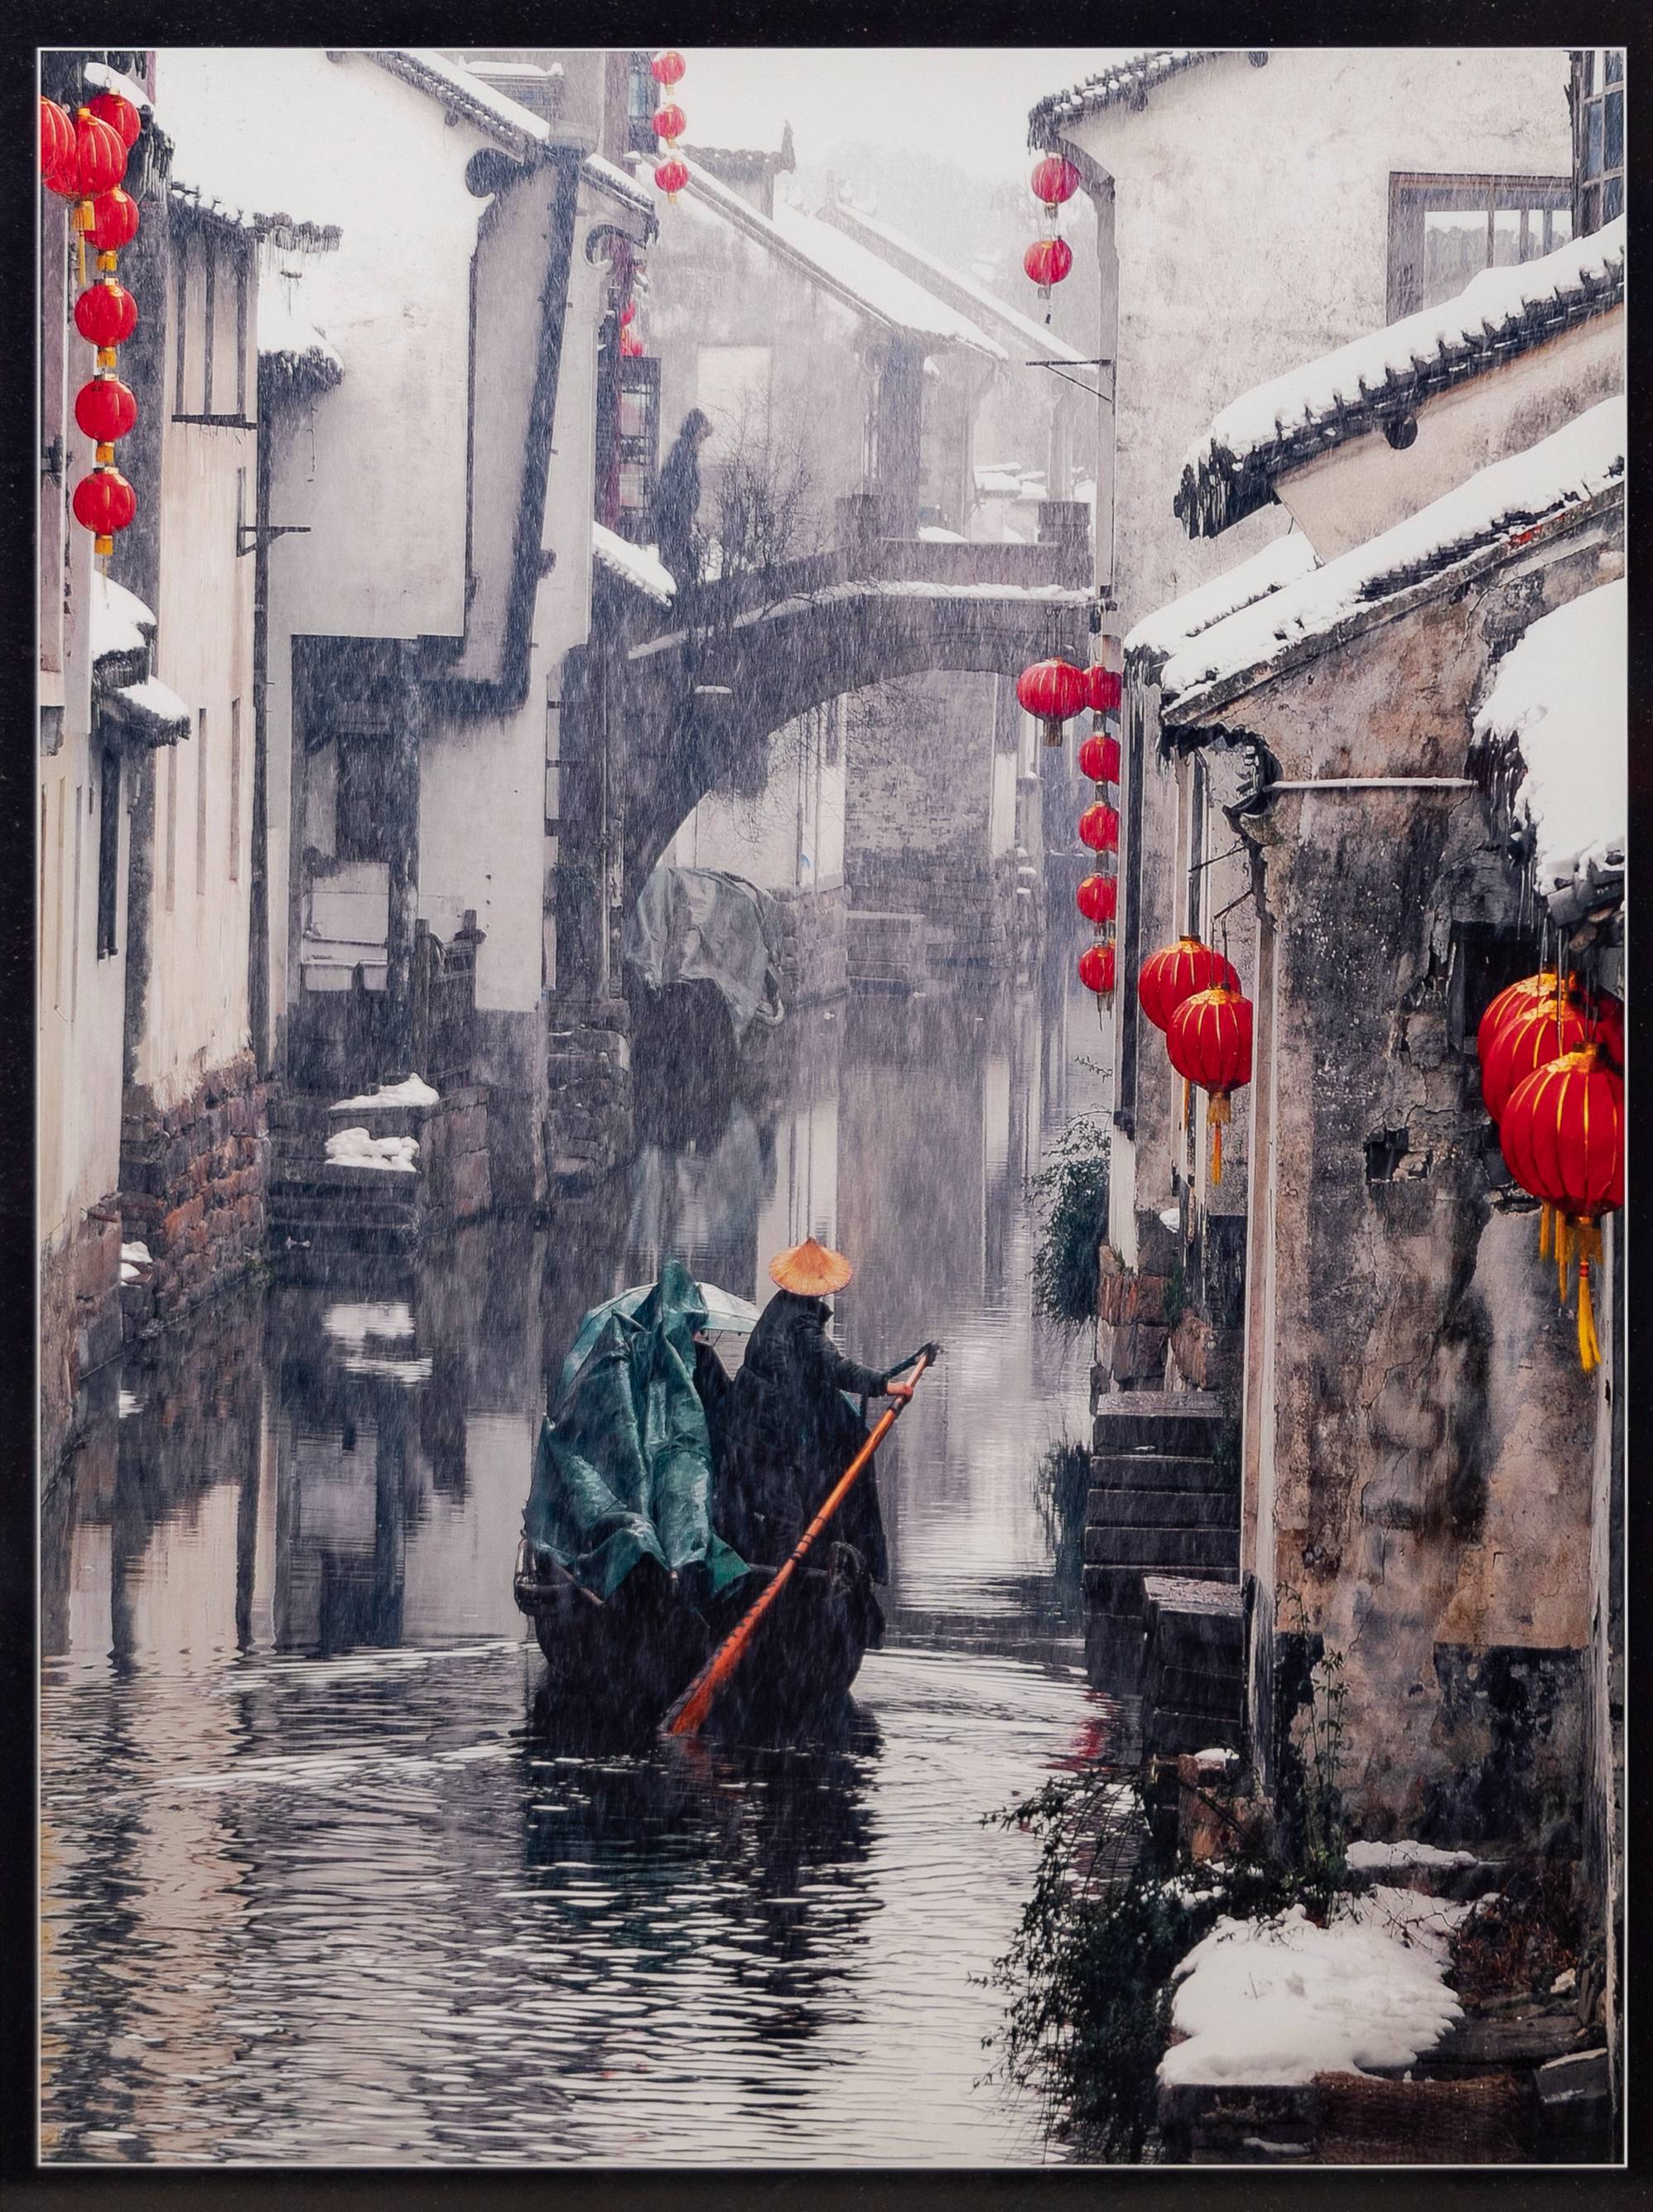 a gondola traveling down an urban waterway with red lanterns hanging on the surrounding buildings